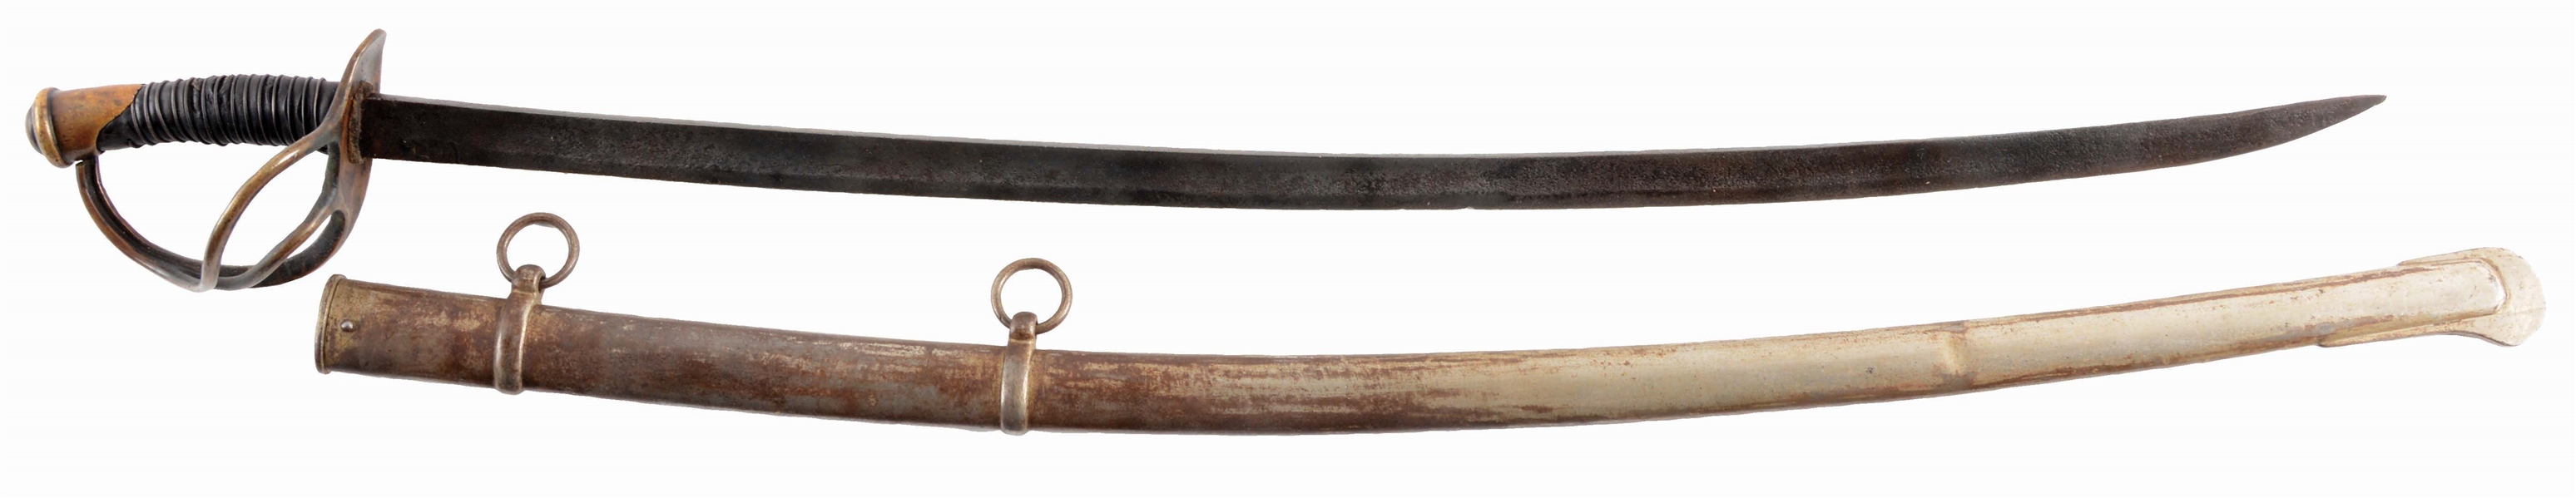 CONFEDERATE DOG RIVER CAVALRY SABER, UNMARKED.